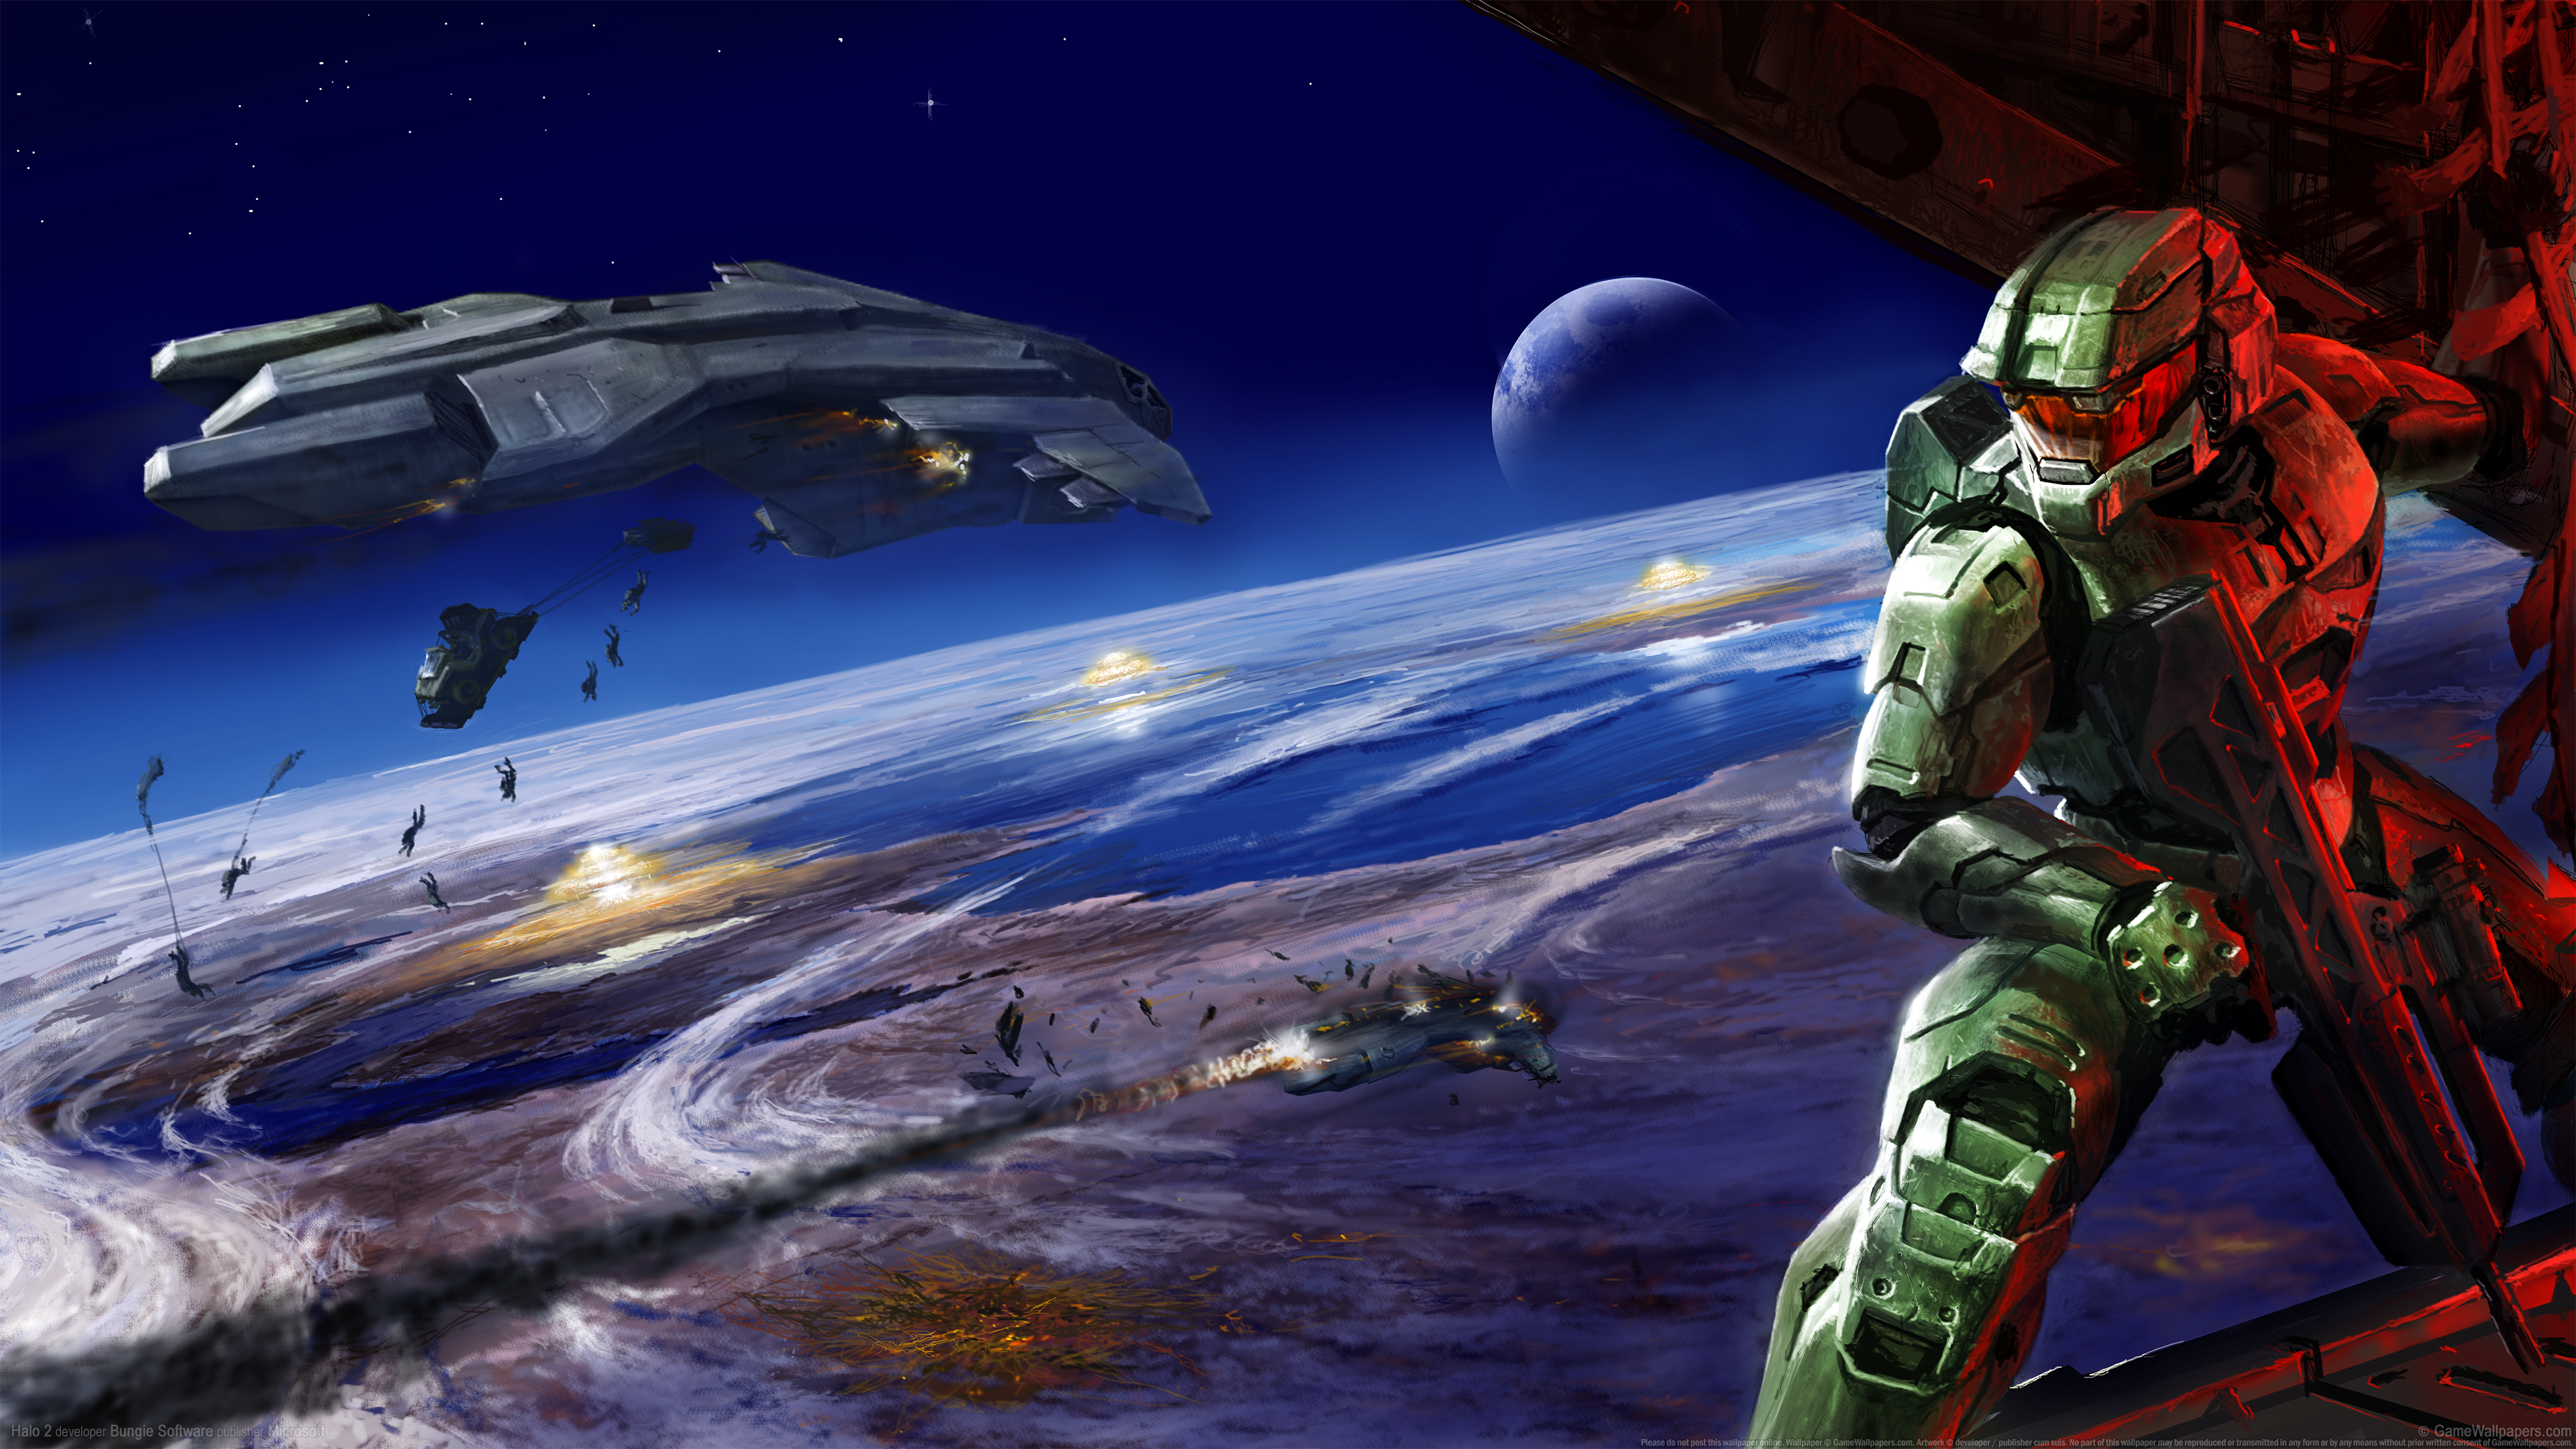 Halo 2 3840x2160 wallpaper or background 18